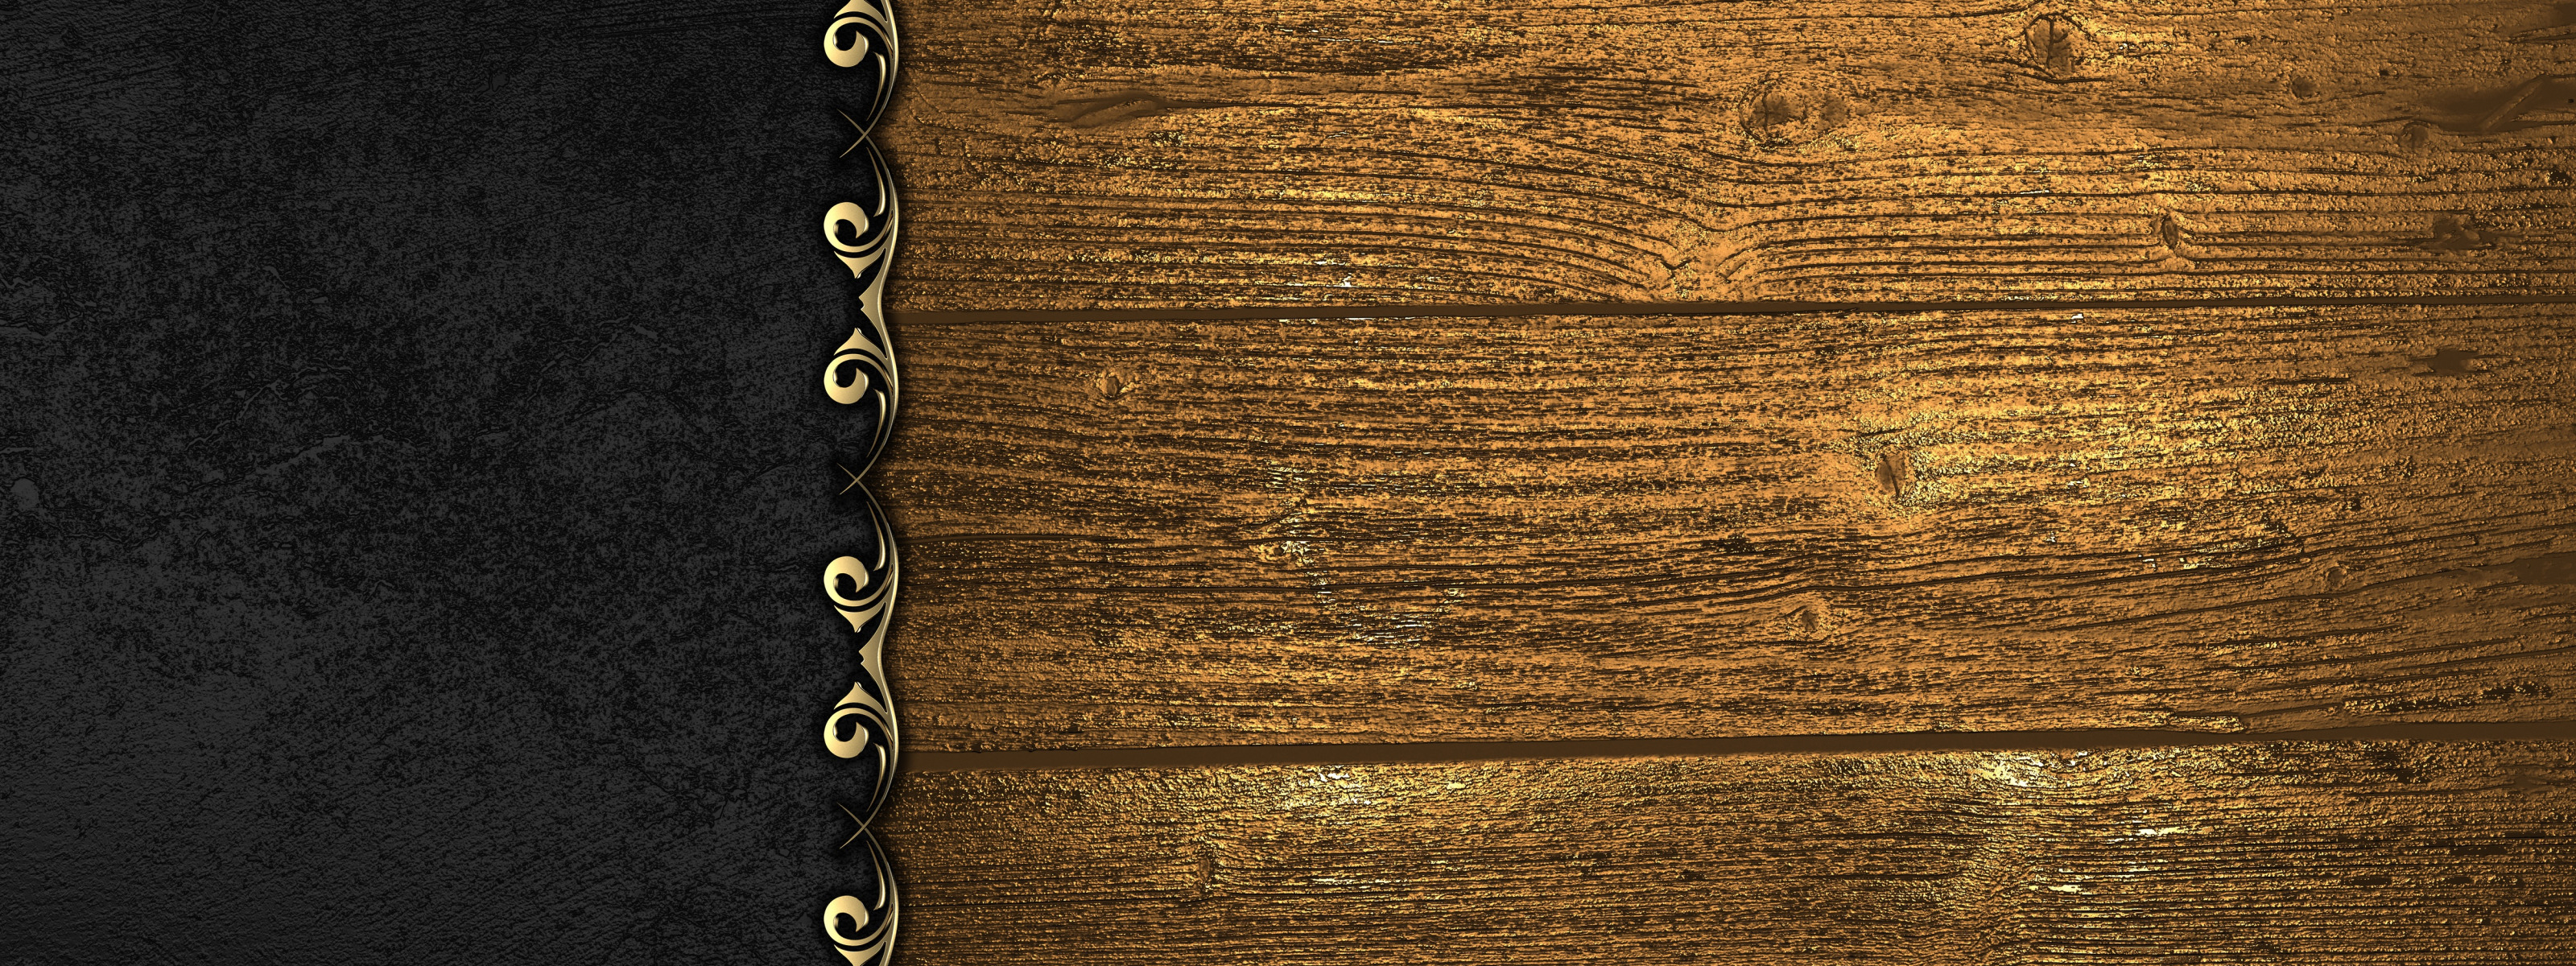 Download wallpaper black, wood, texture, background, luxury, section  textures in resolution 3200x1200